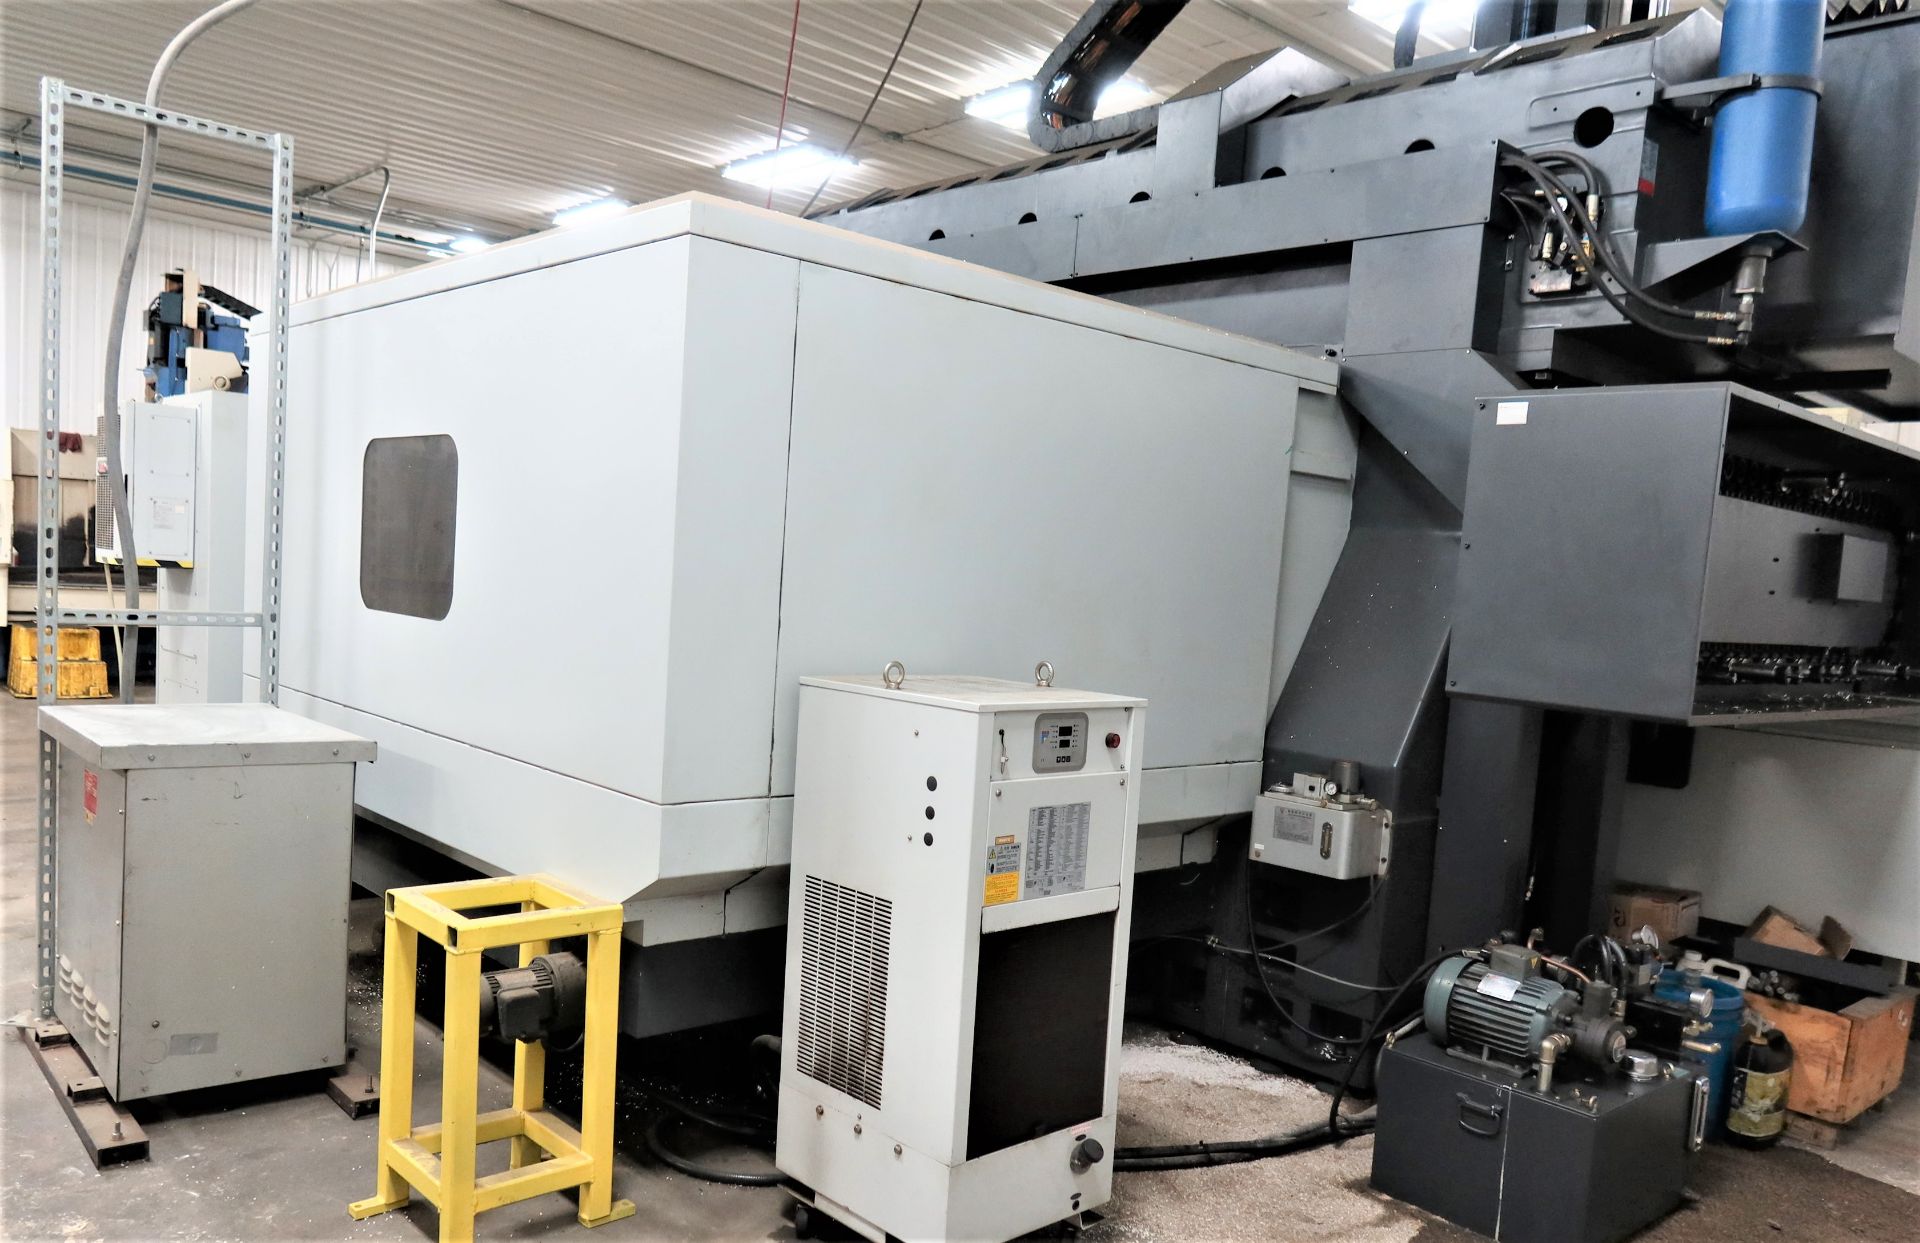 SOLD SOLD SOLD Feeler Model FV-3224 Double Column CNC Bridge Mill, New 2015 - Image 13 of 17